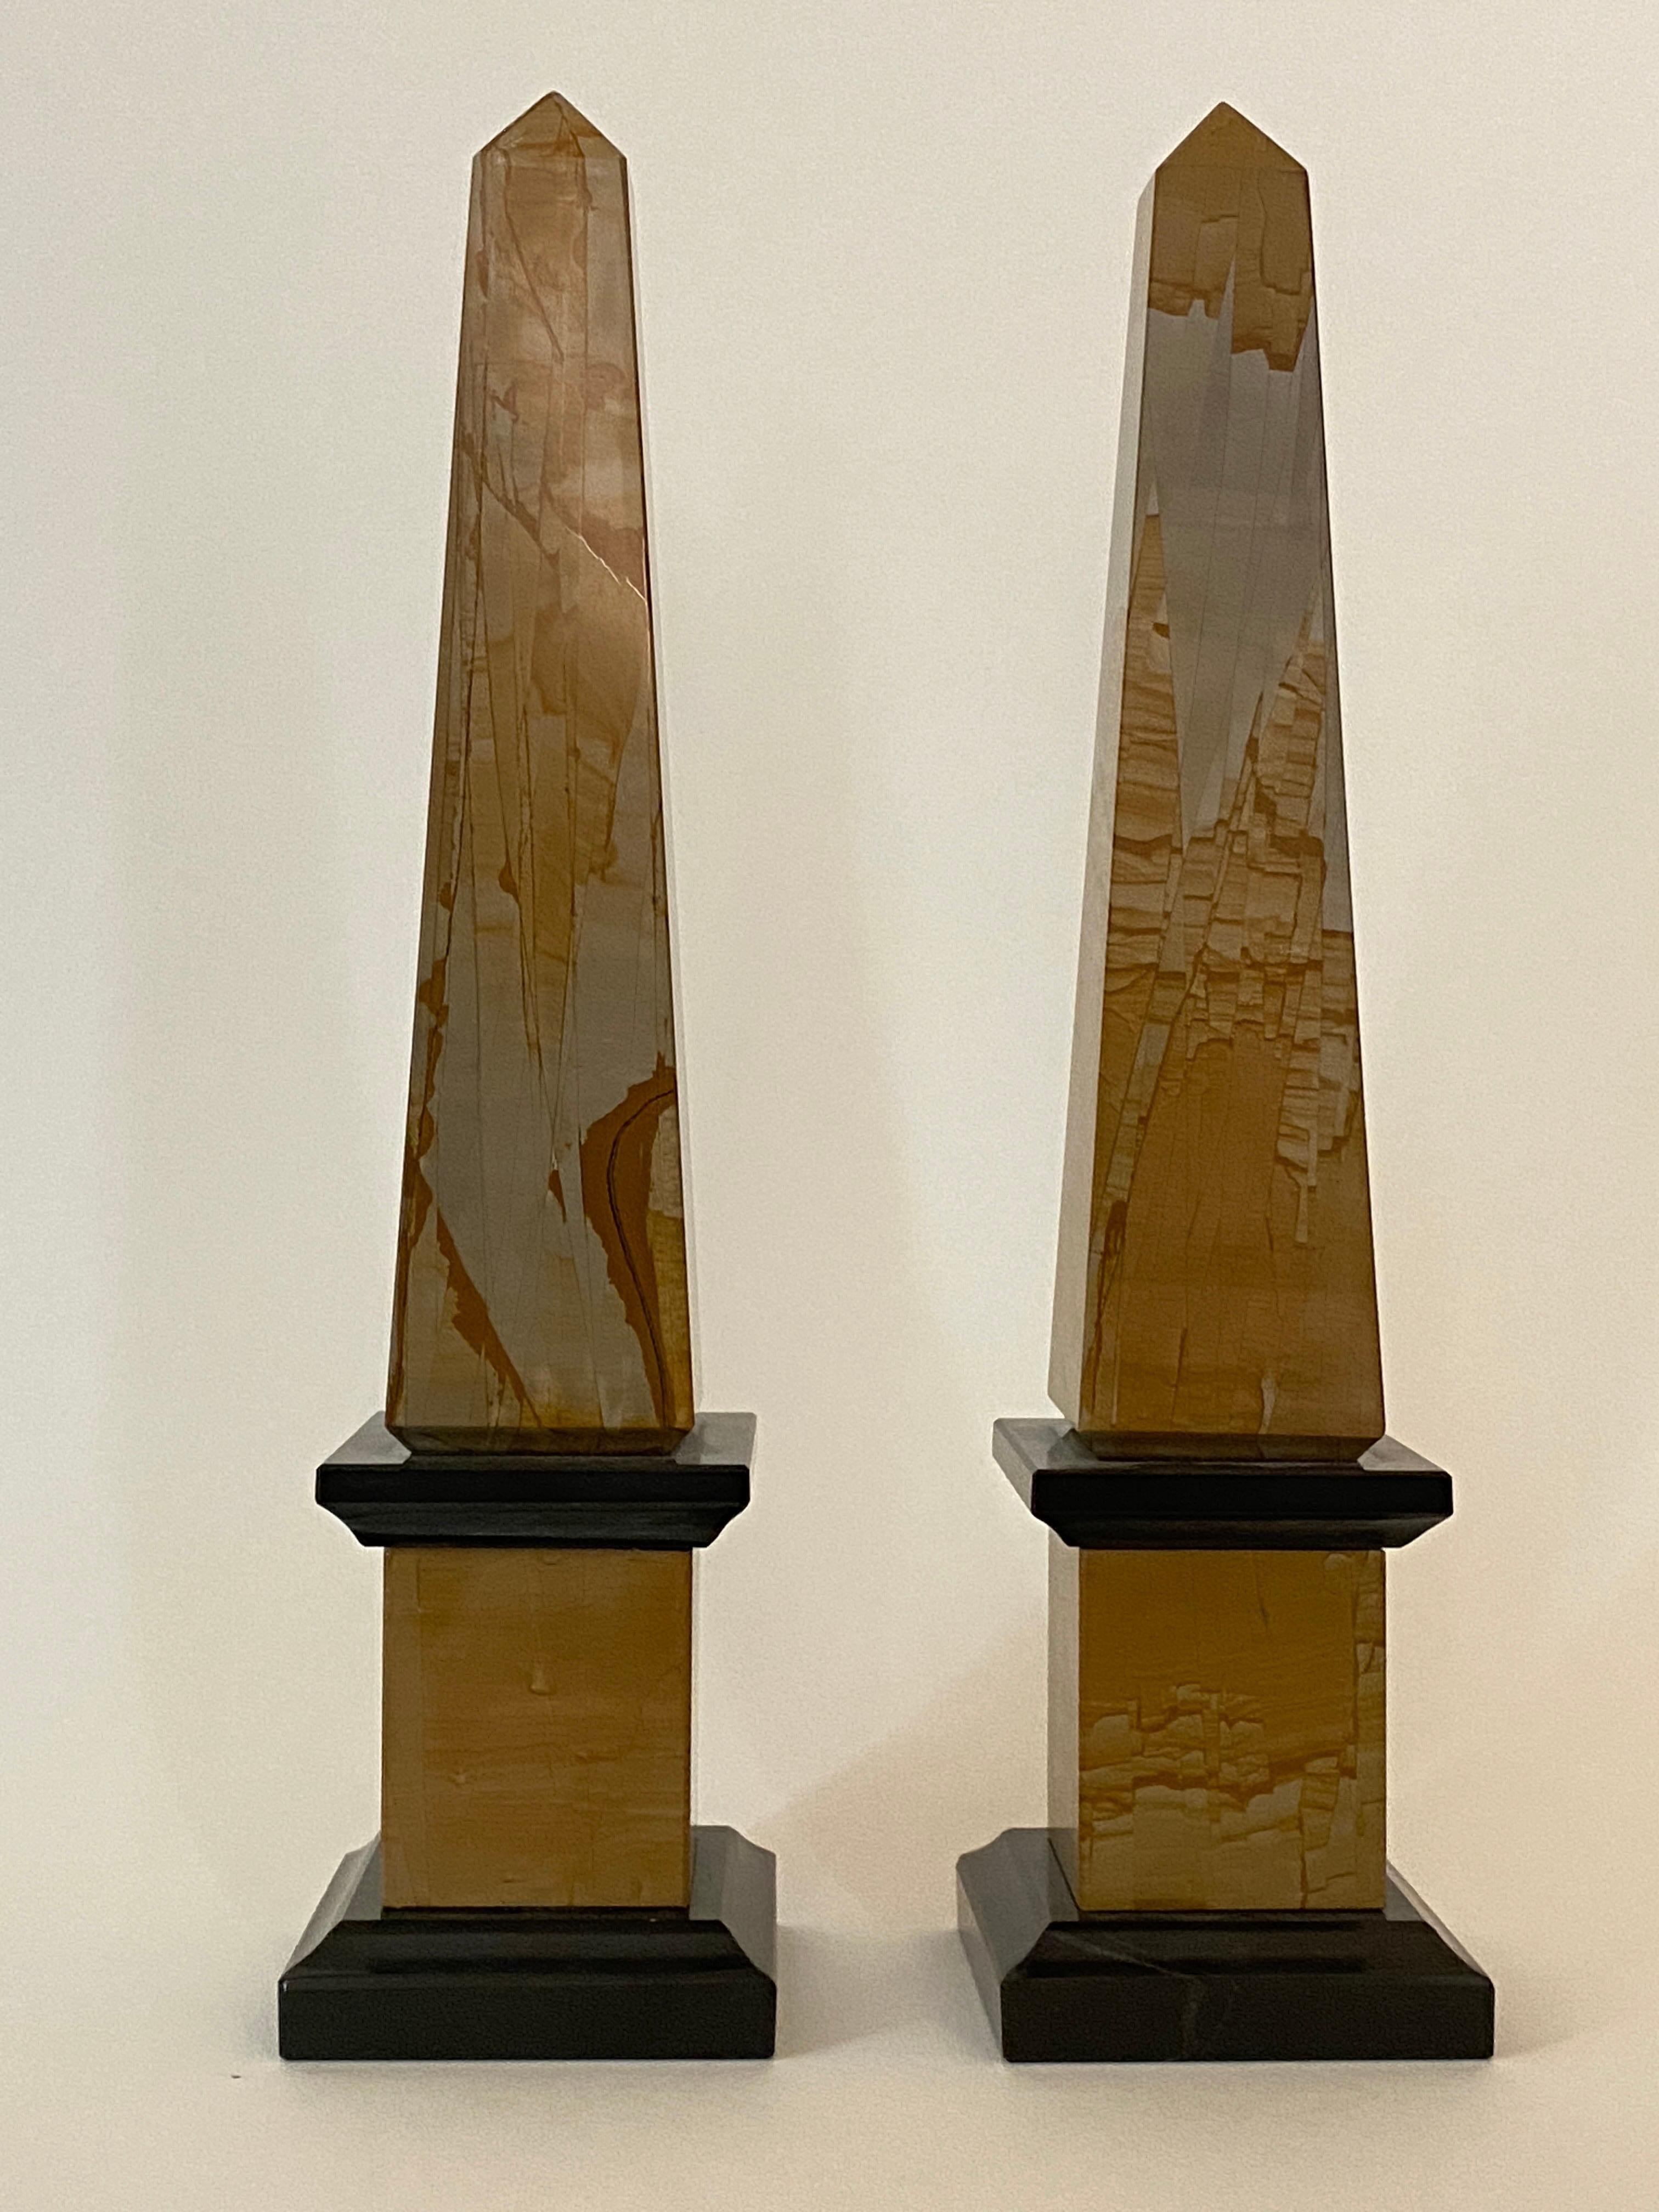 Rare pair of Neoclassical Italian obelisks in pietra paesine and black portoro marble.

Pietra paesine are very fine stones which, once cut into strips and polished, reveal a predominantly beige, ocher, red-brown or blue-green design.

The design is